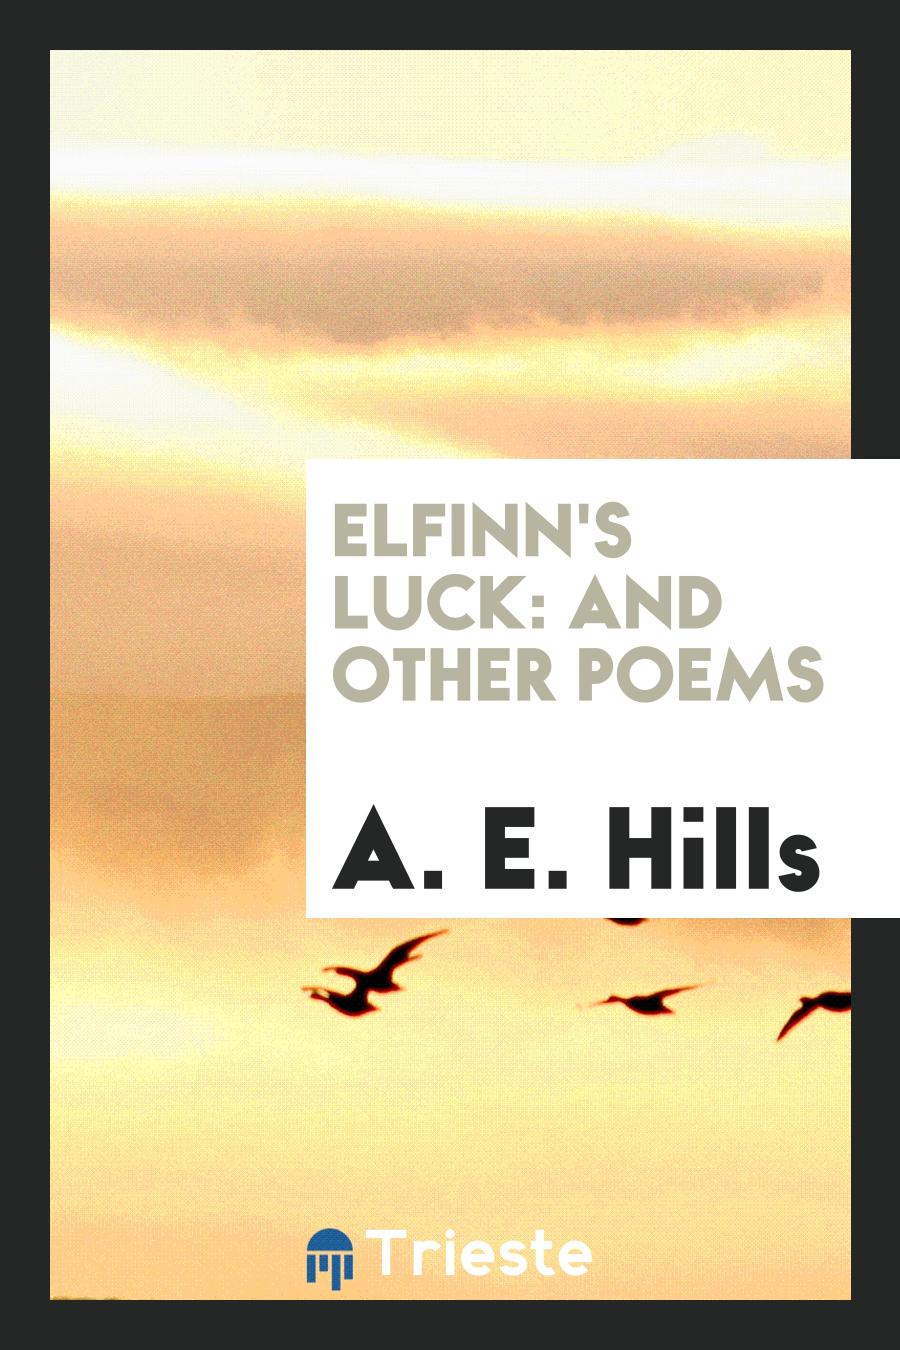 A. E. Hills - Elfinn's Luck: And Other Poems